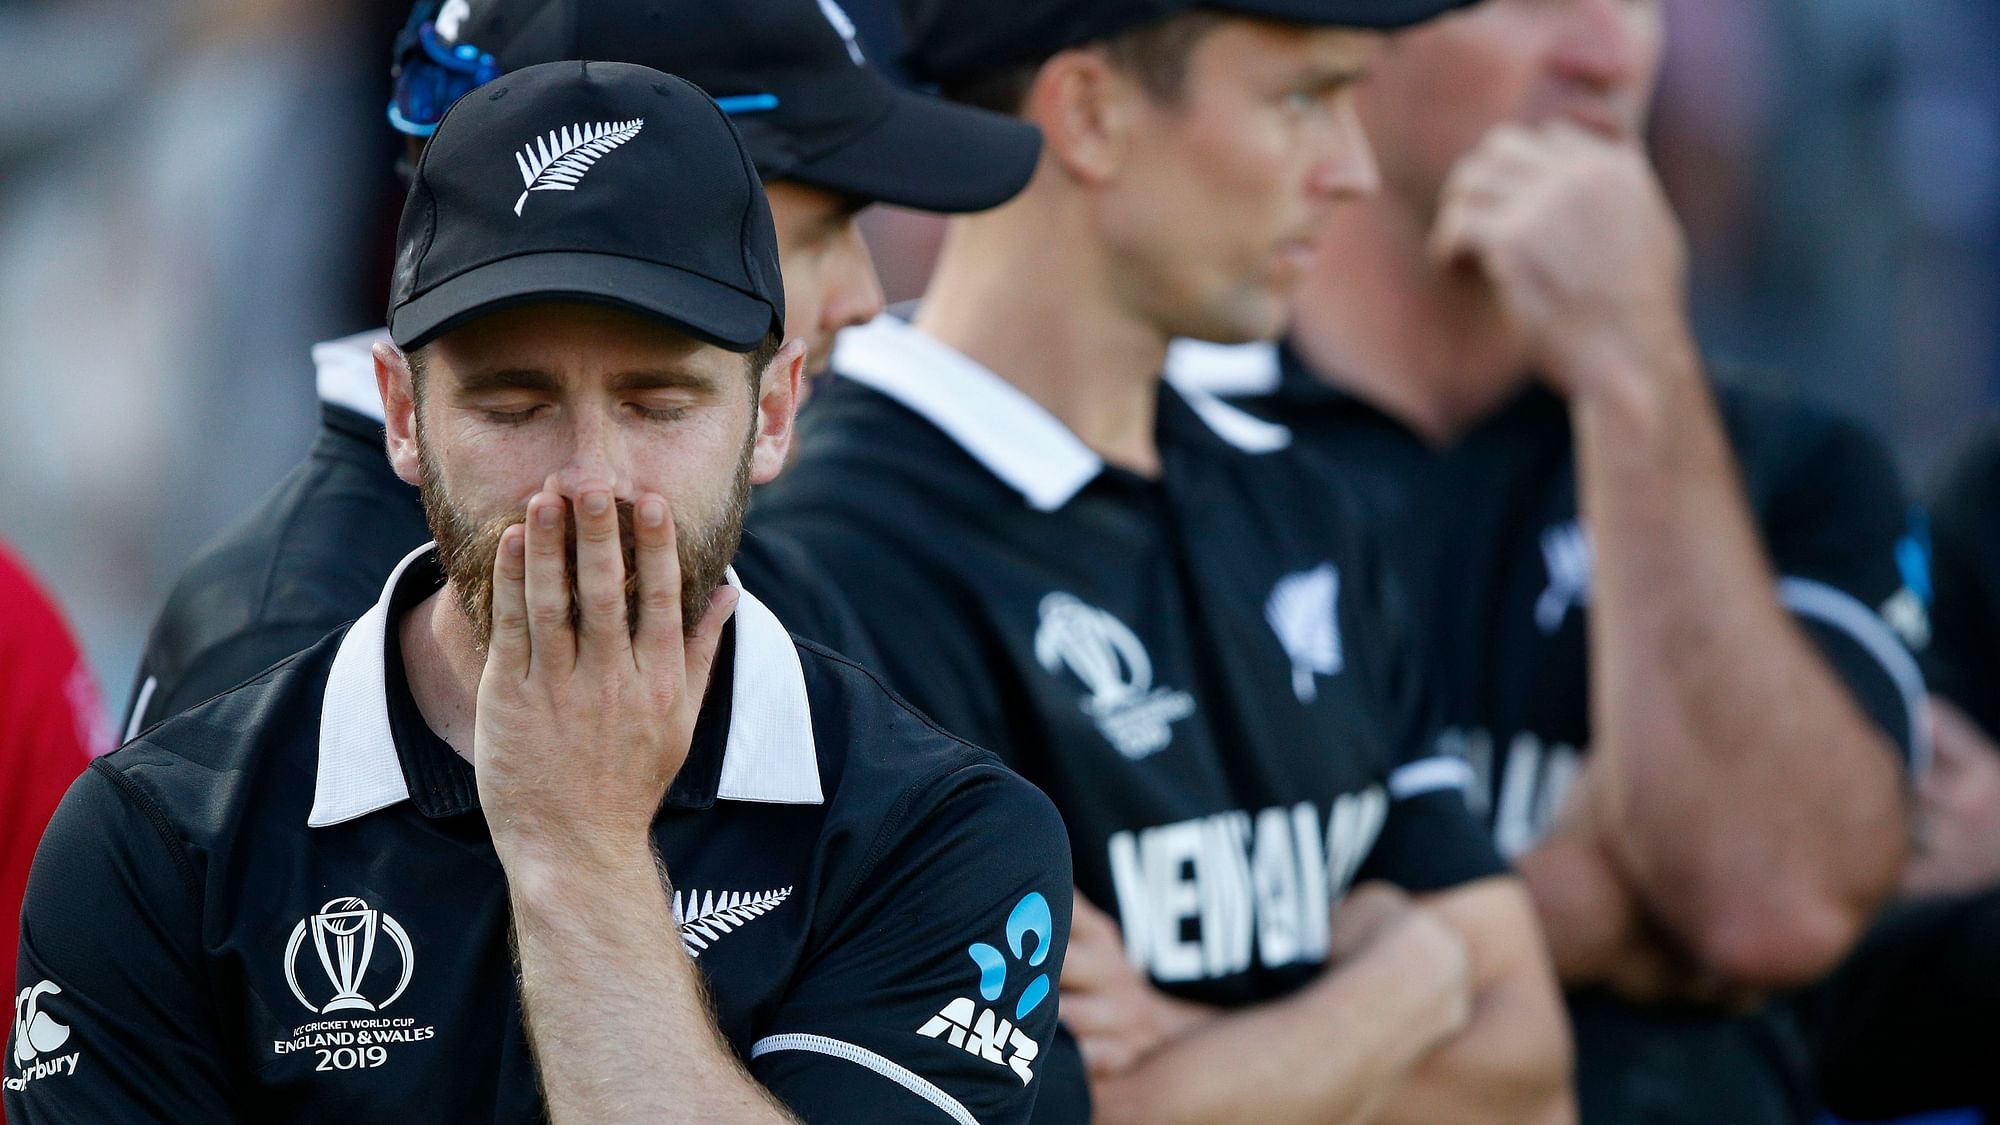 Kane Williamson was the losing skipper in the 2019 World Cup final that was decided eventually on a boundary count.